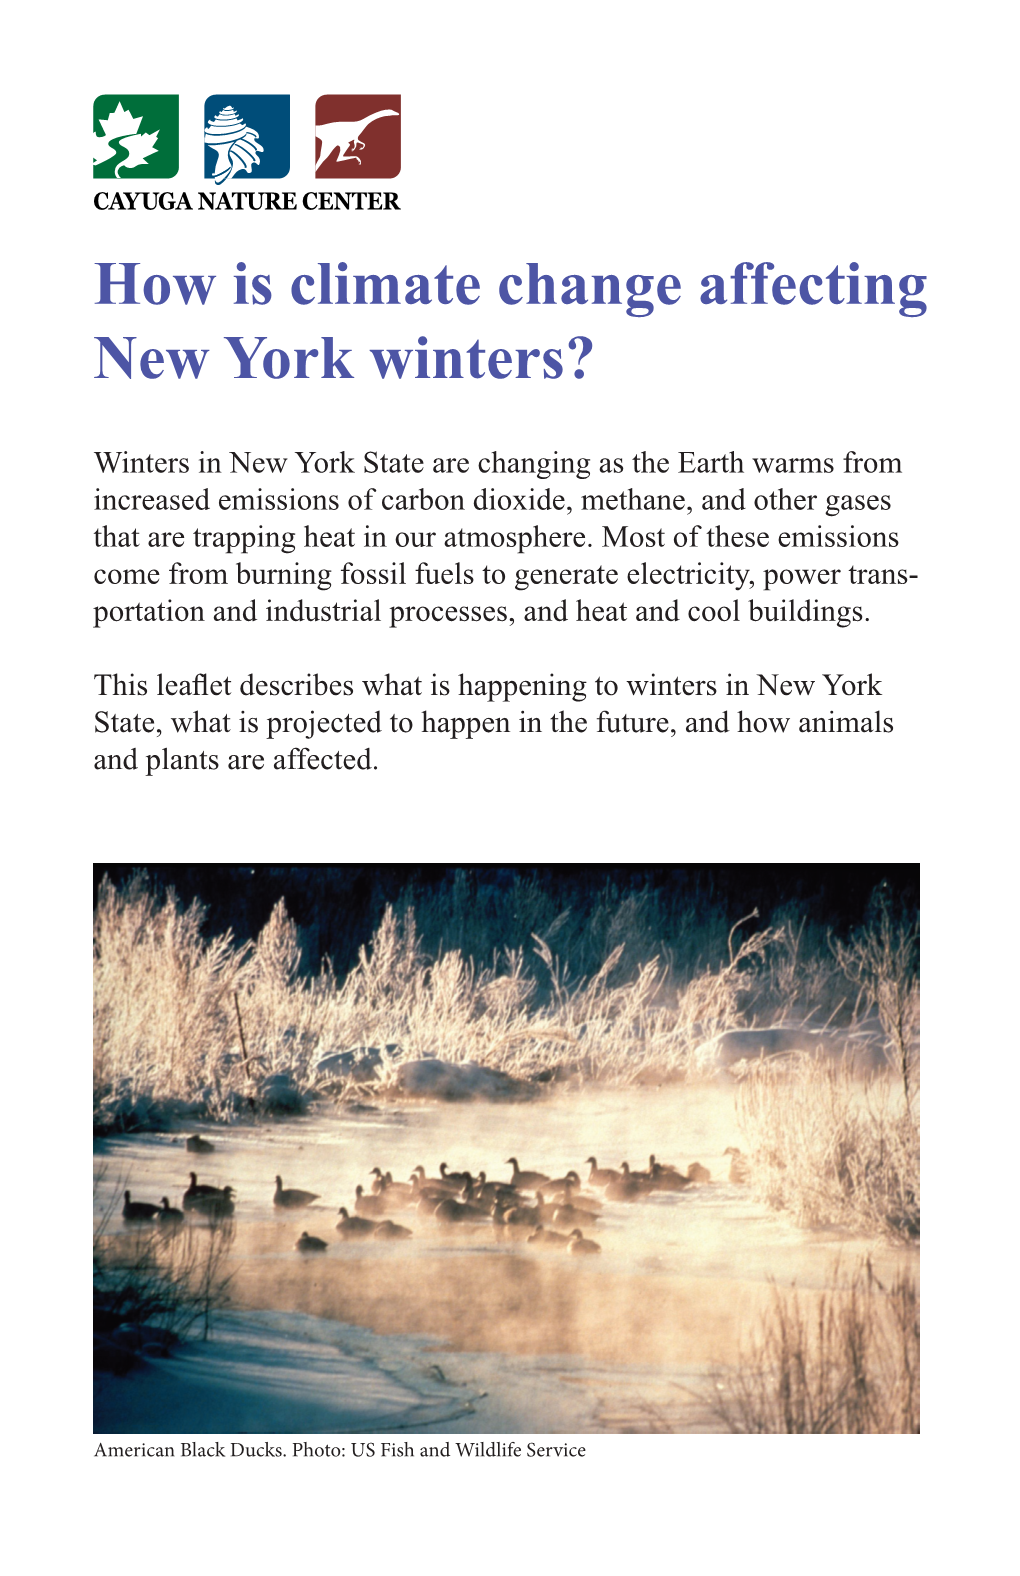 How Is Climate Change Affecting New York Winters?